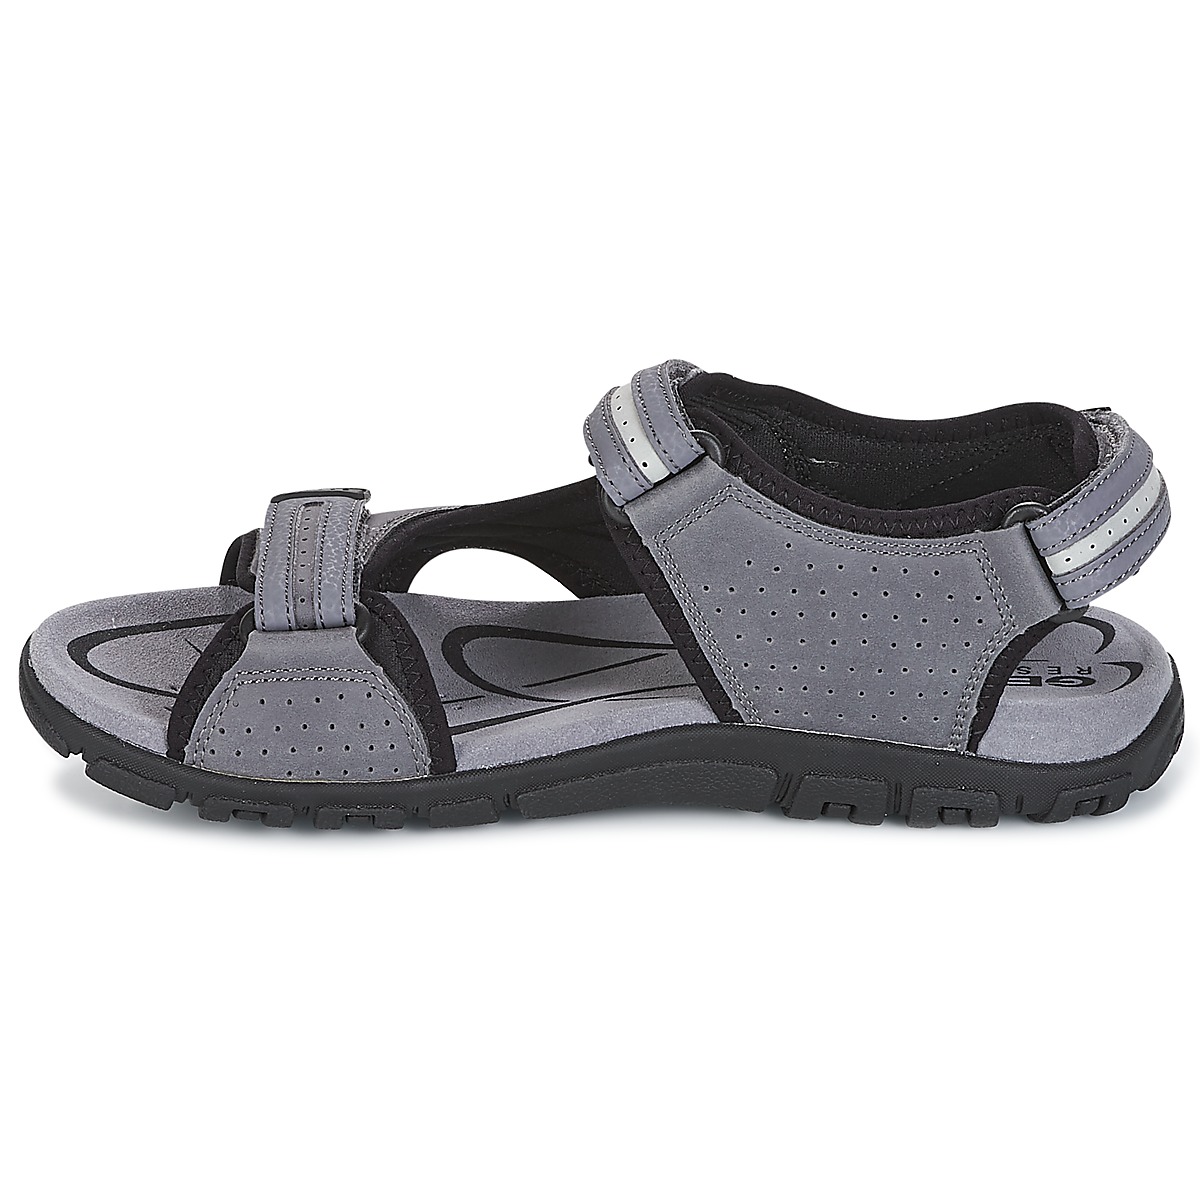 Geox Gris S.STRADA D 5rRYMEvy